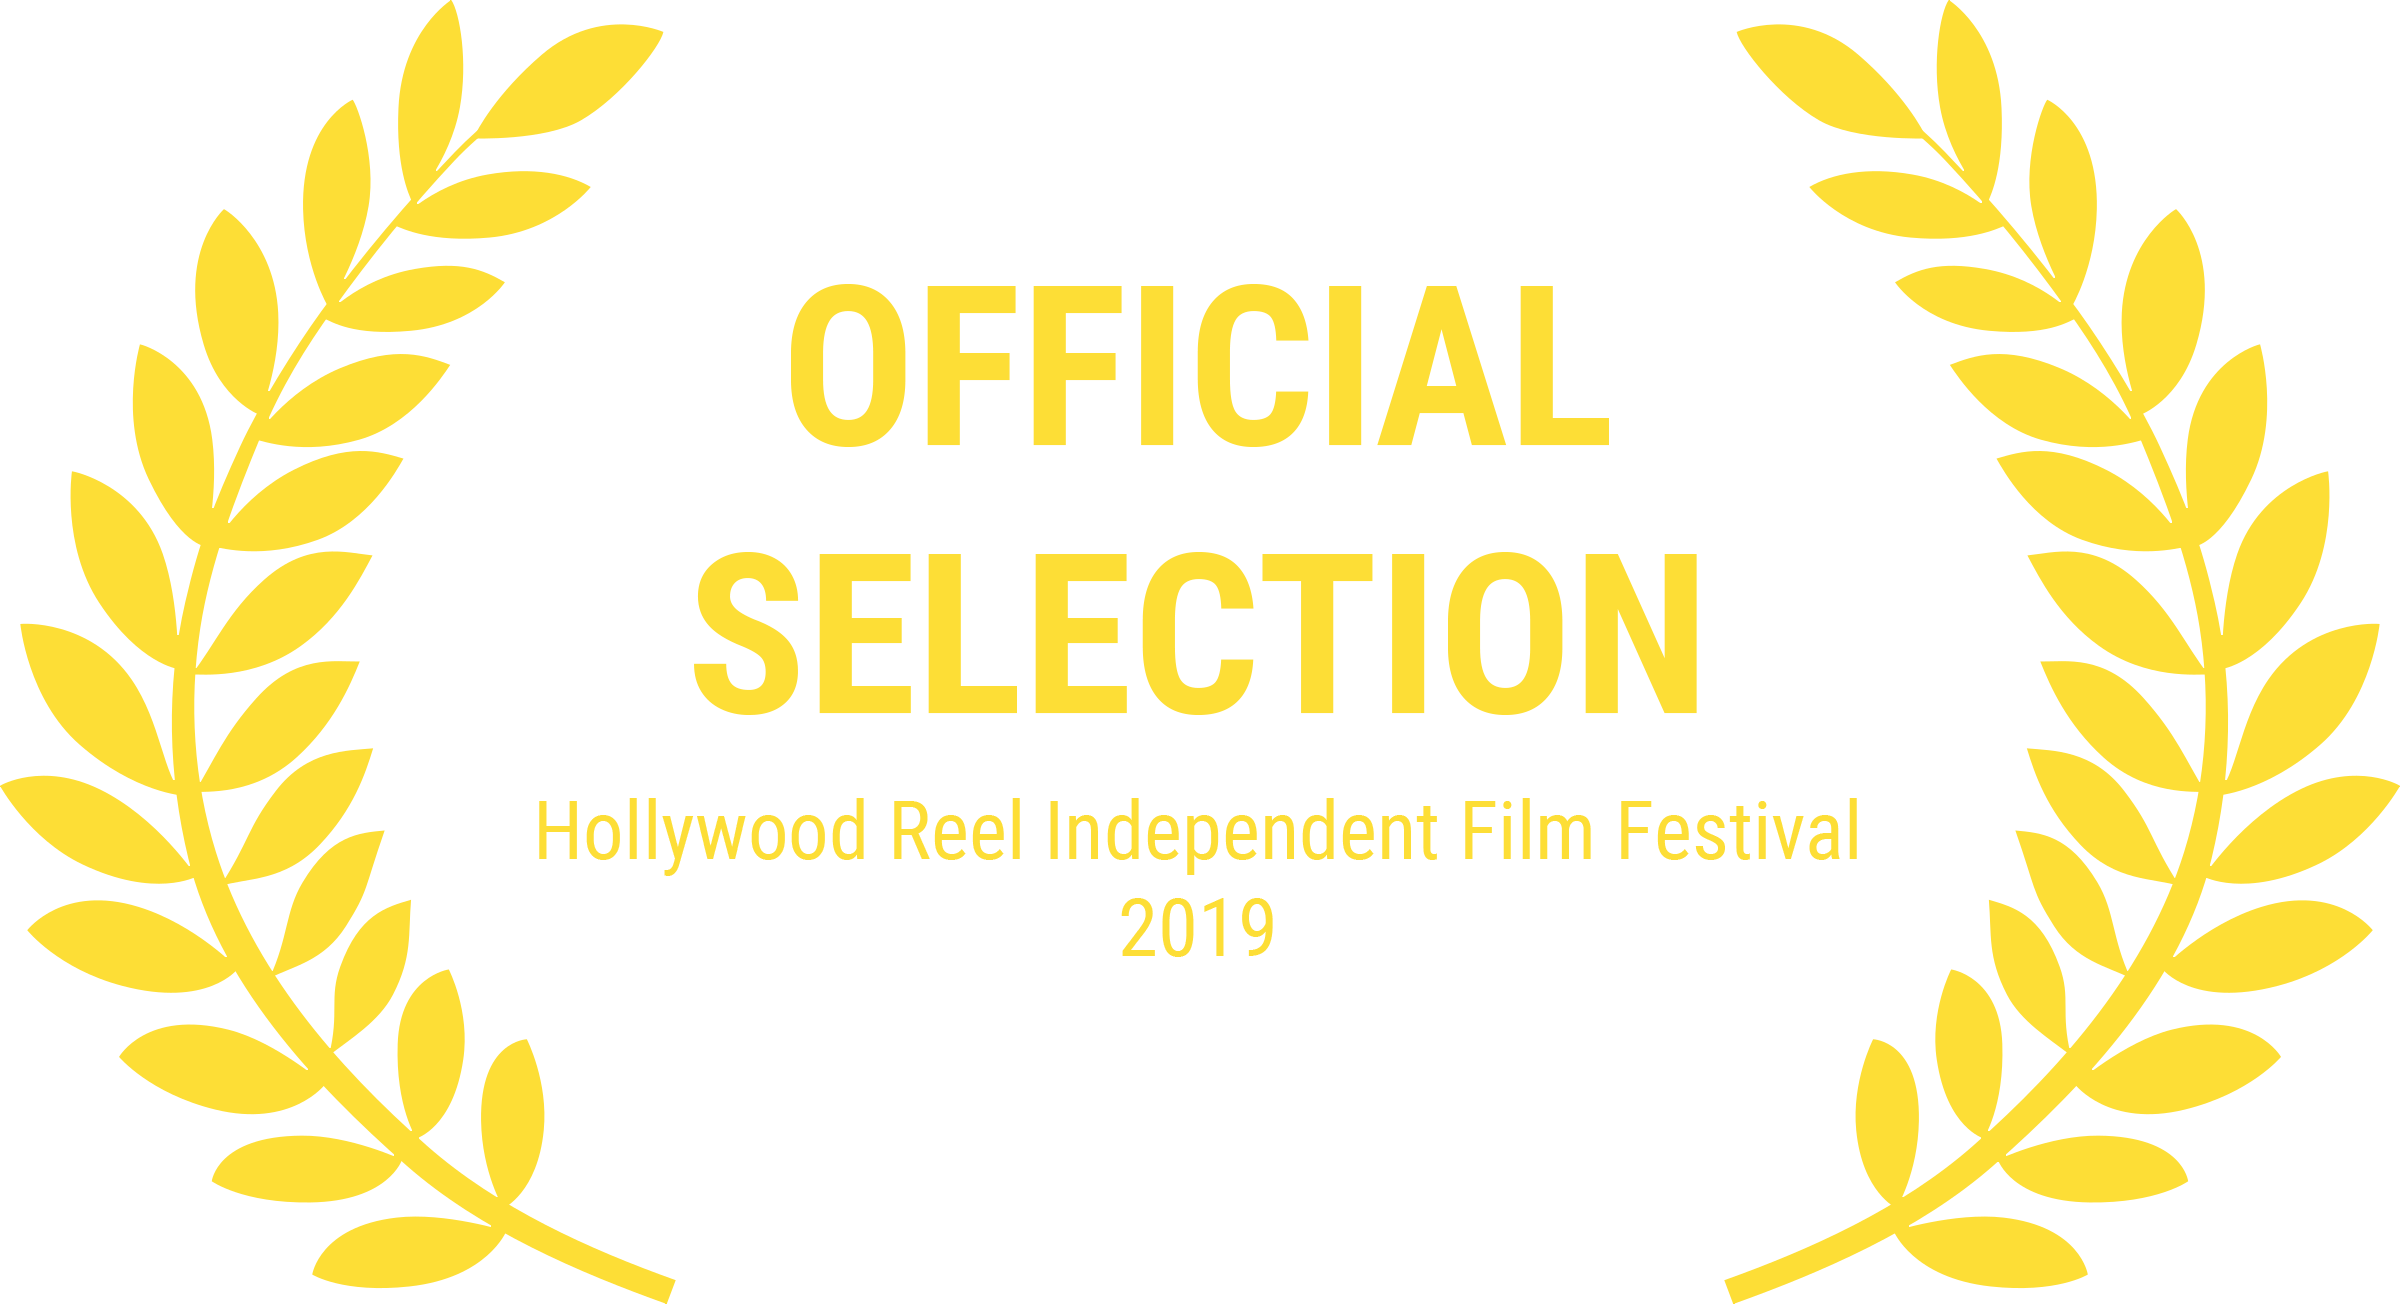 Low Low - Official Selection - Hollywood Reel Independent Film Festival 2019